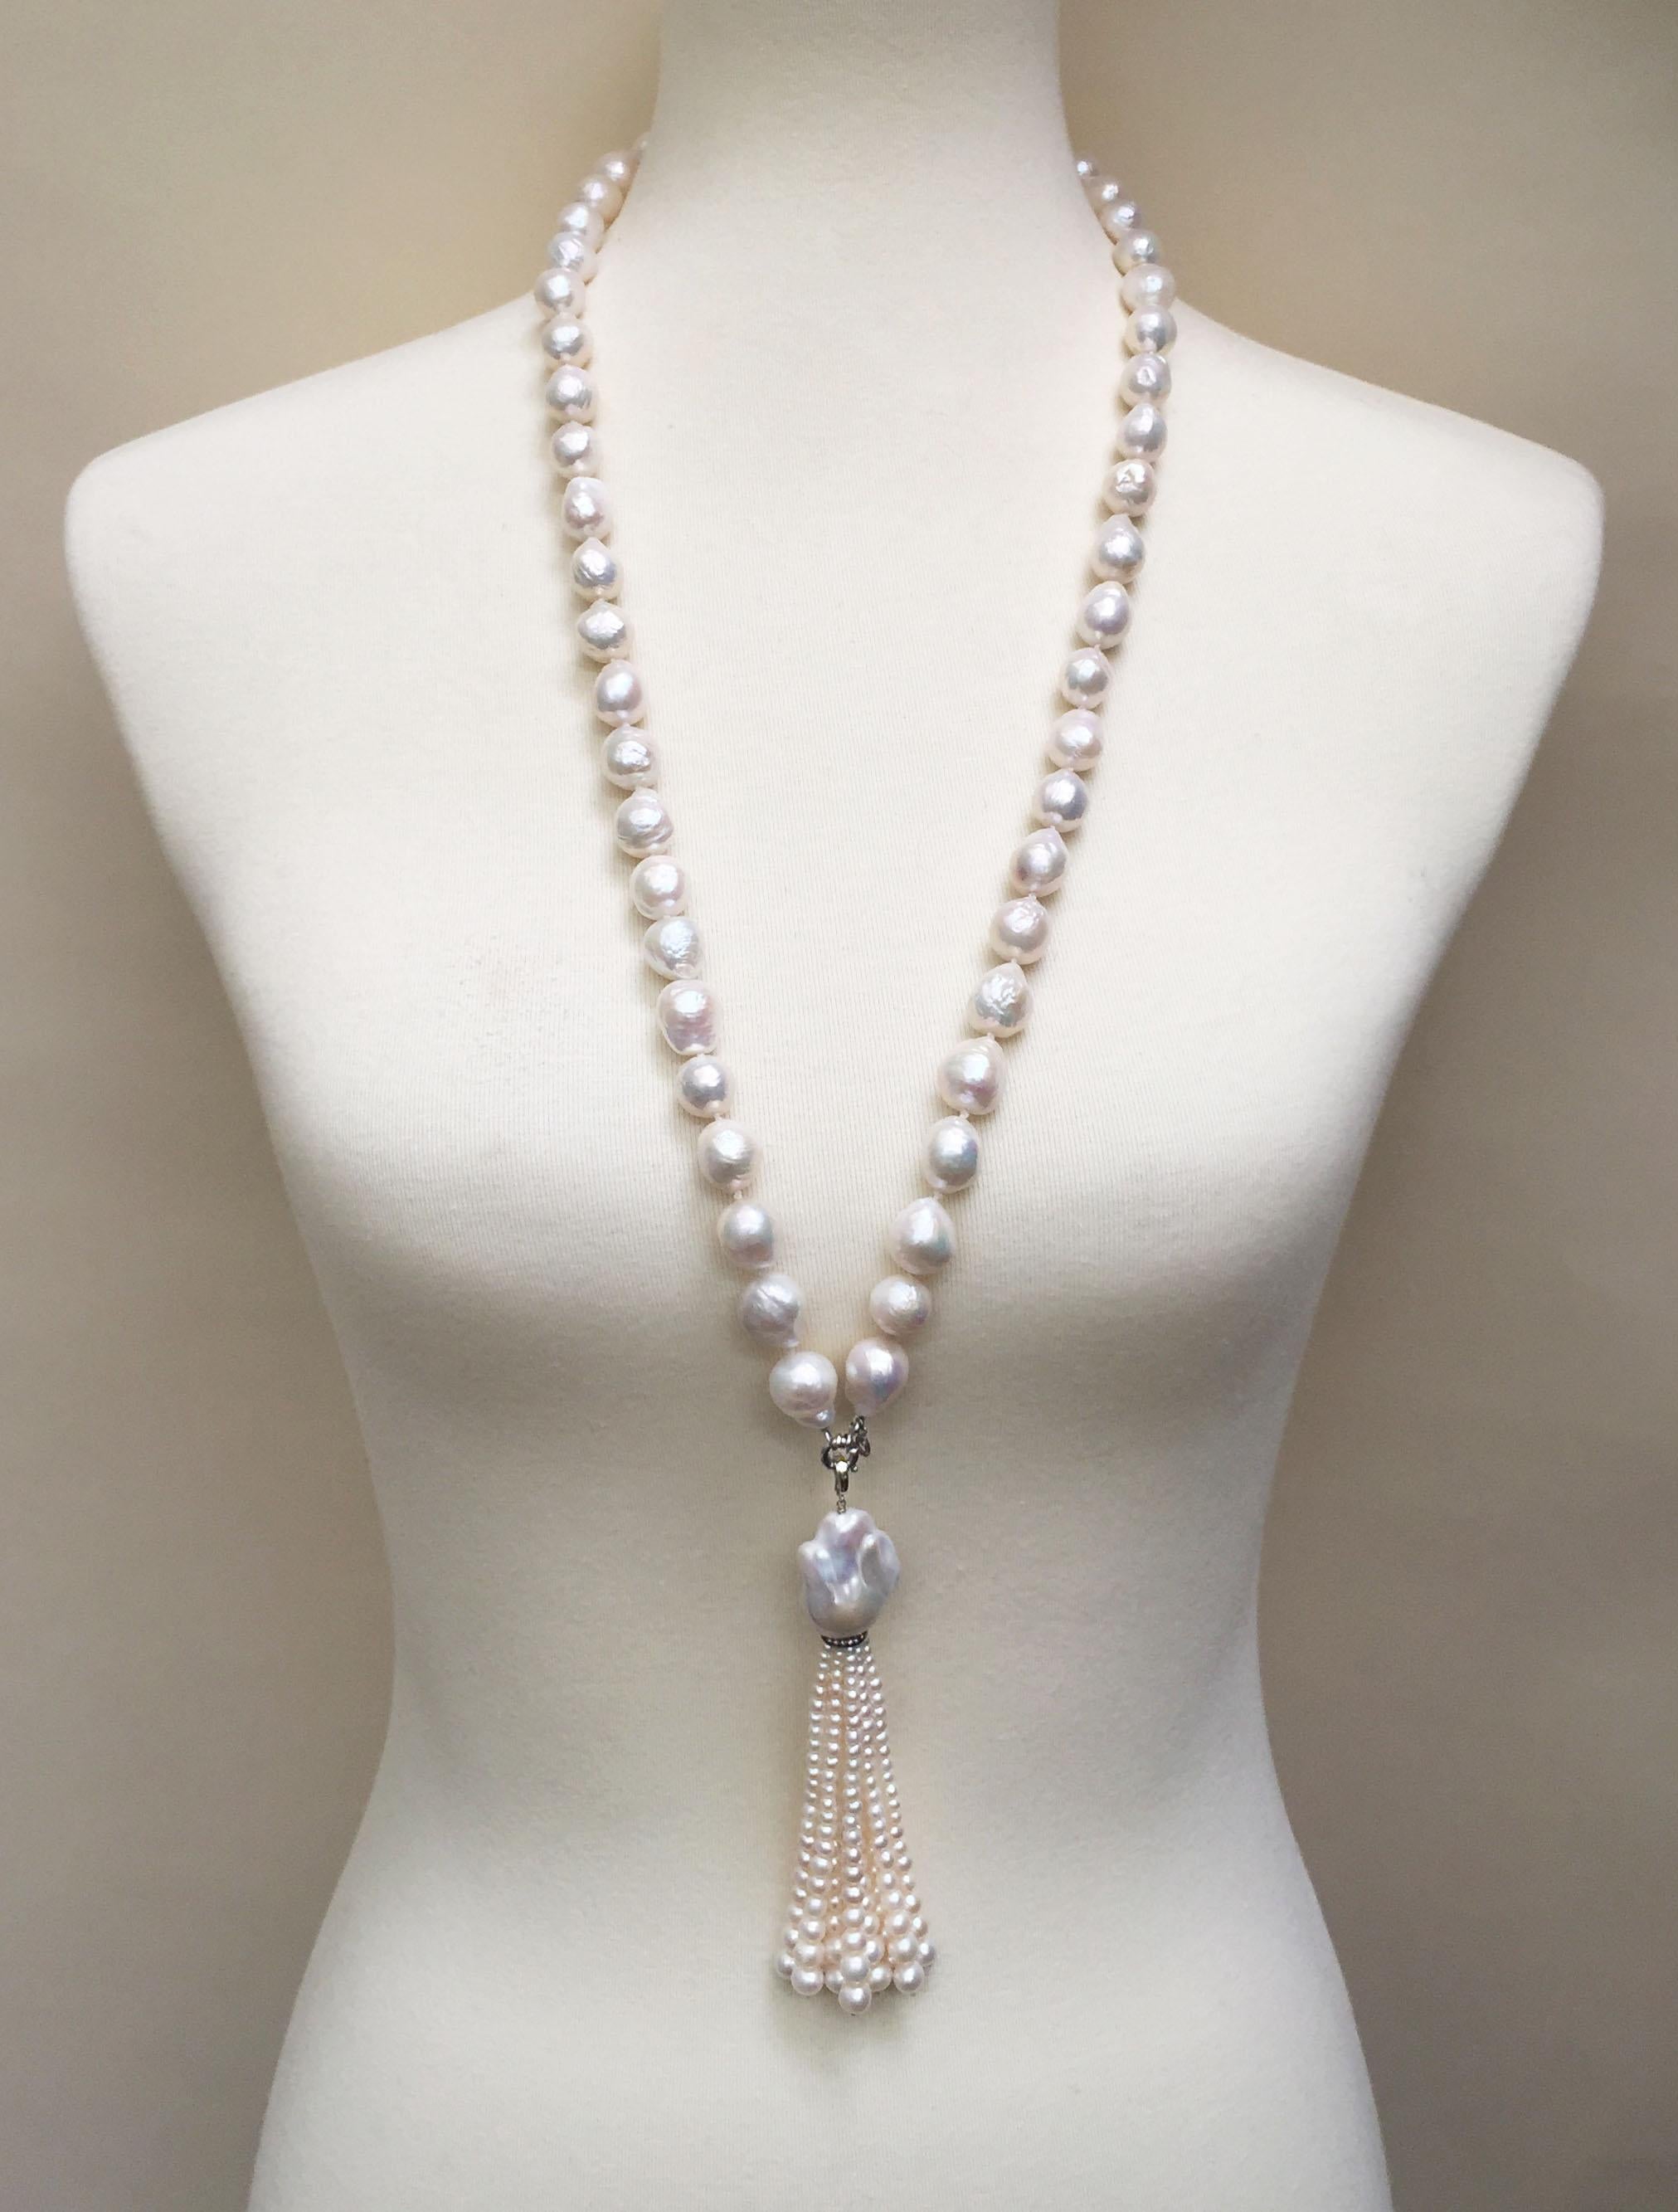 This large pearl necklace with pearl and diamond tassel and 14 k white gold clasp is made with carefully chosen 15 mm white pearls that create elegant lines going through the necklace. The tassel starts with a large baroque white pearl (28 x 21 mm),